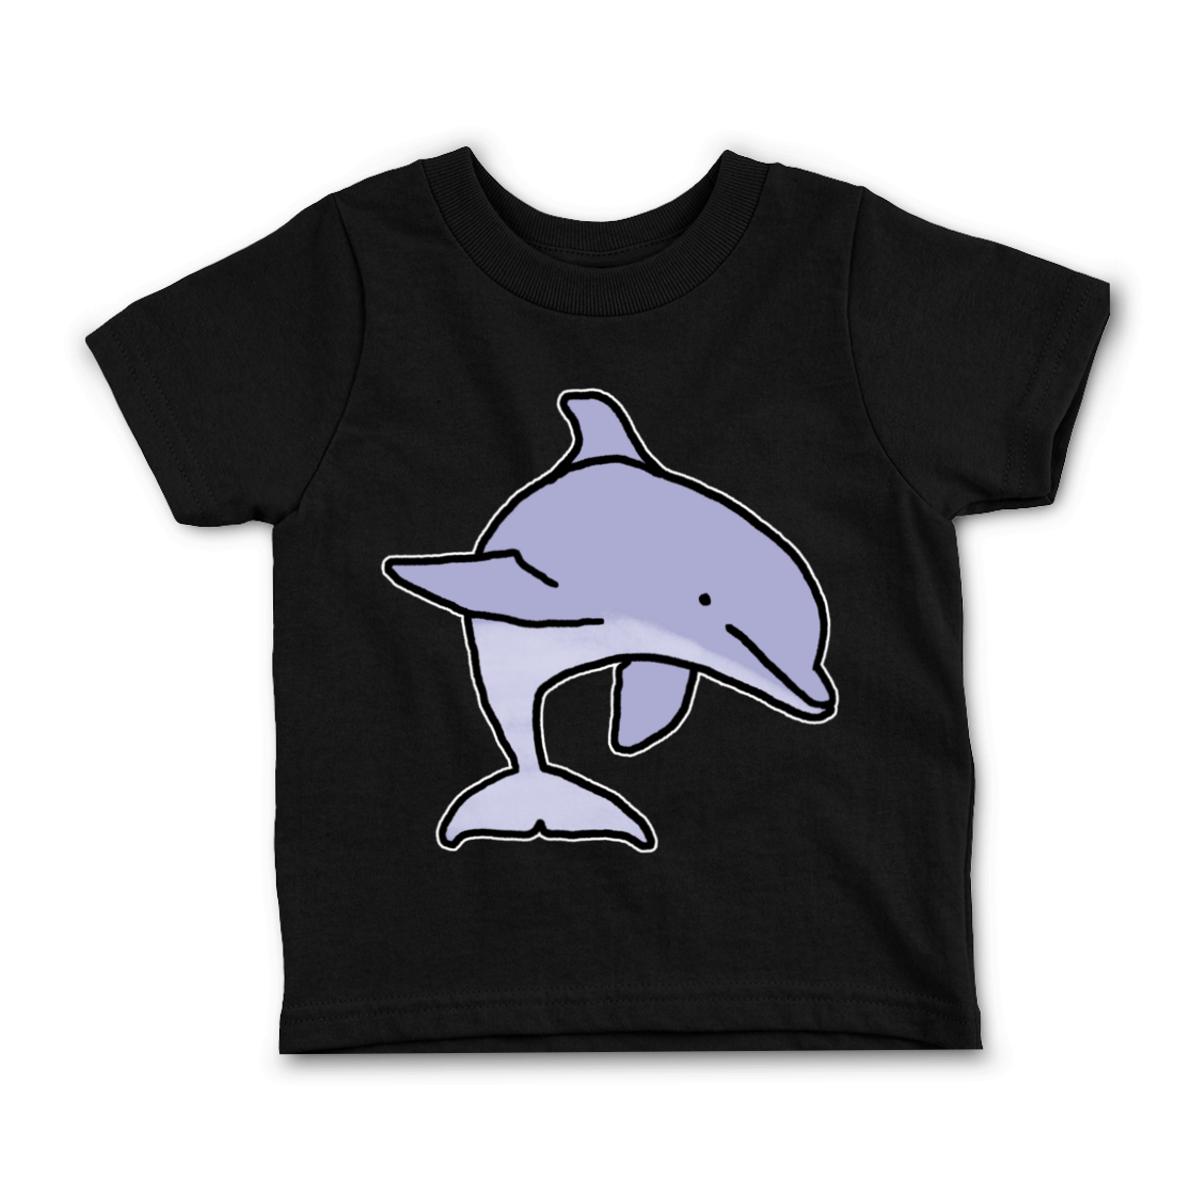 Dolphin Toddler Tee 4T black